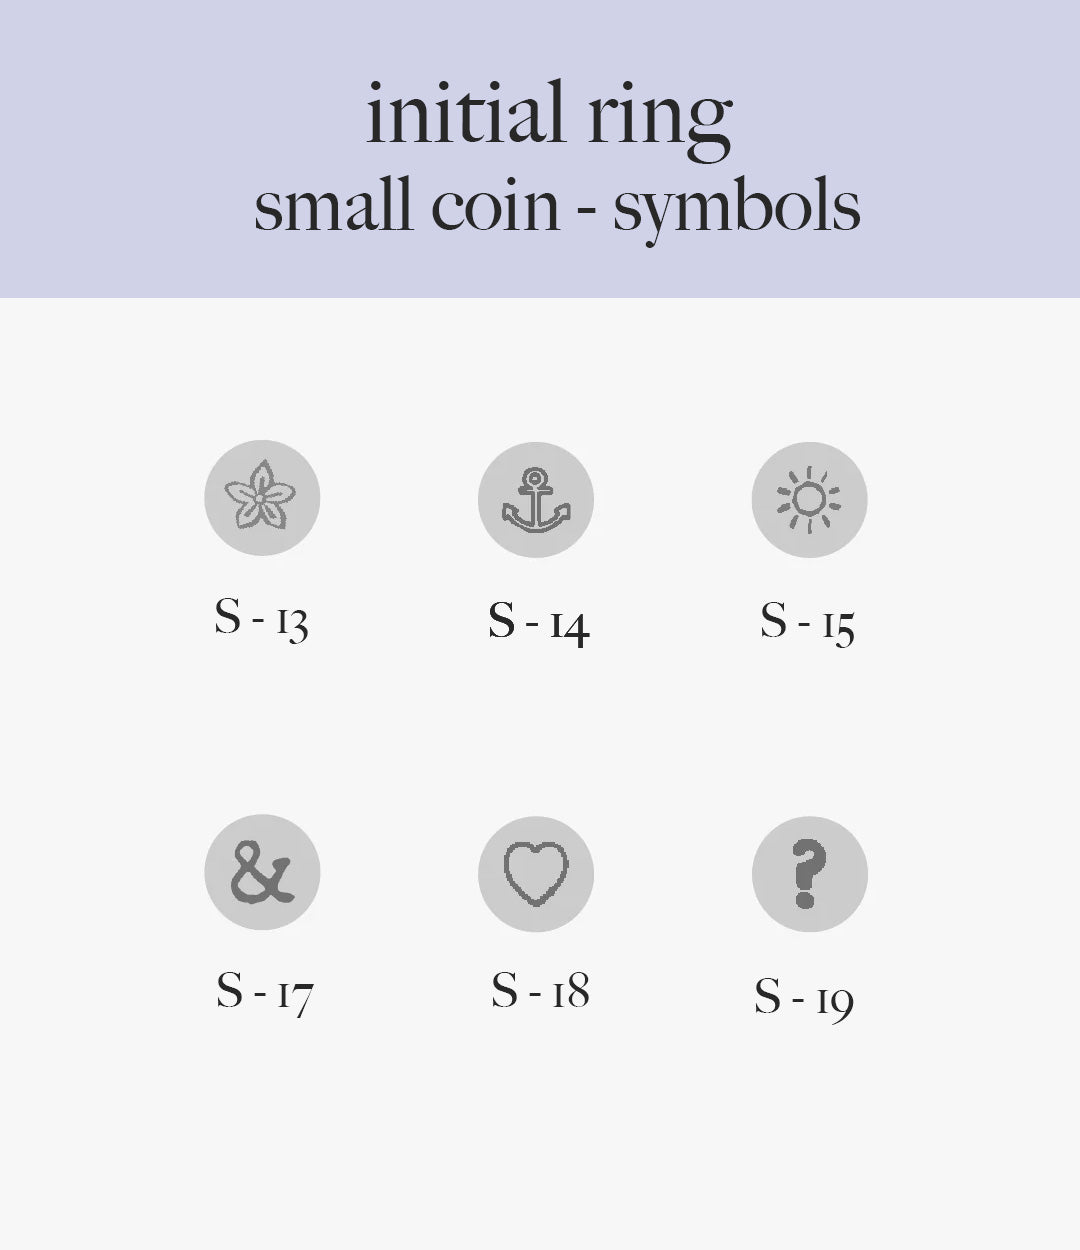 Initiaal ring gold filled